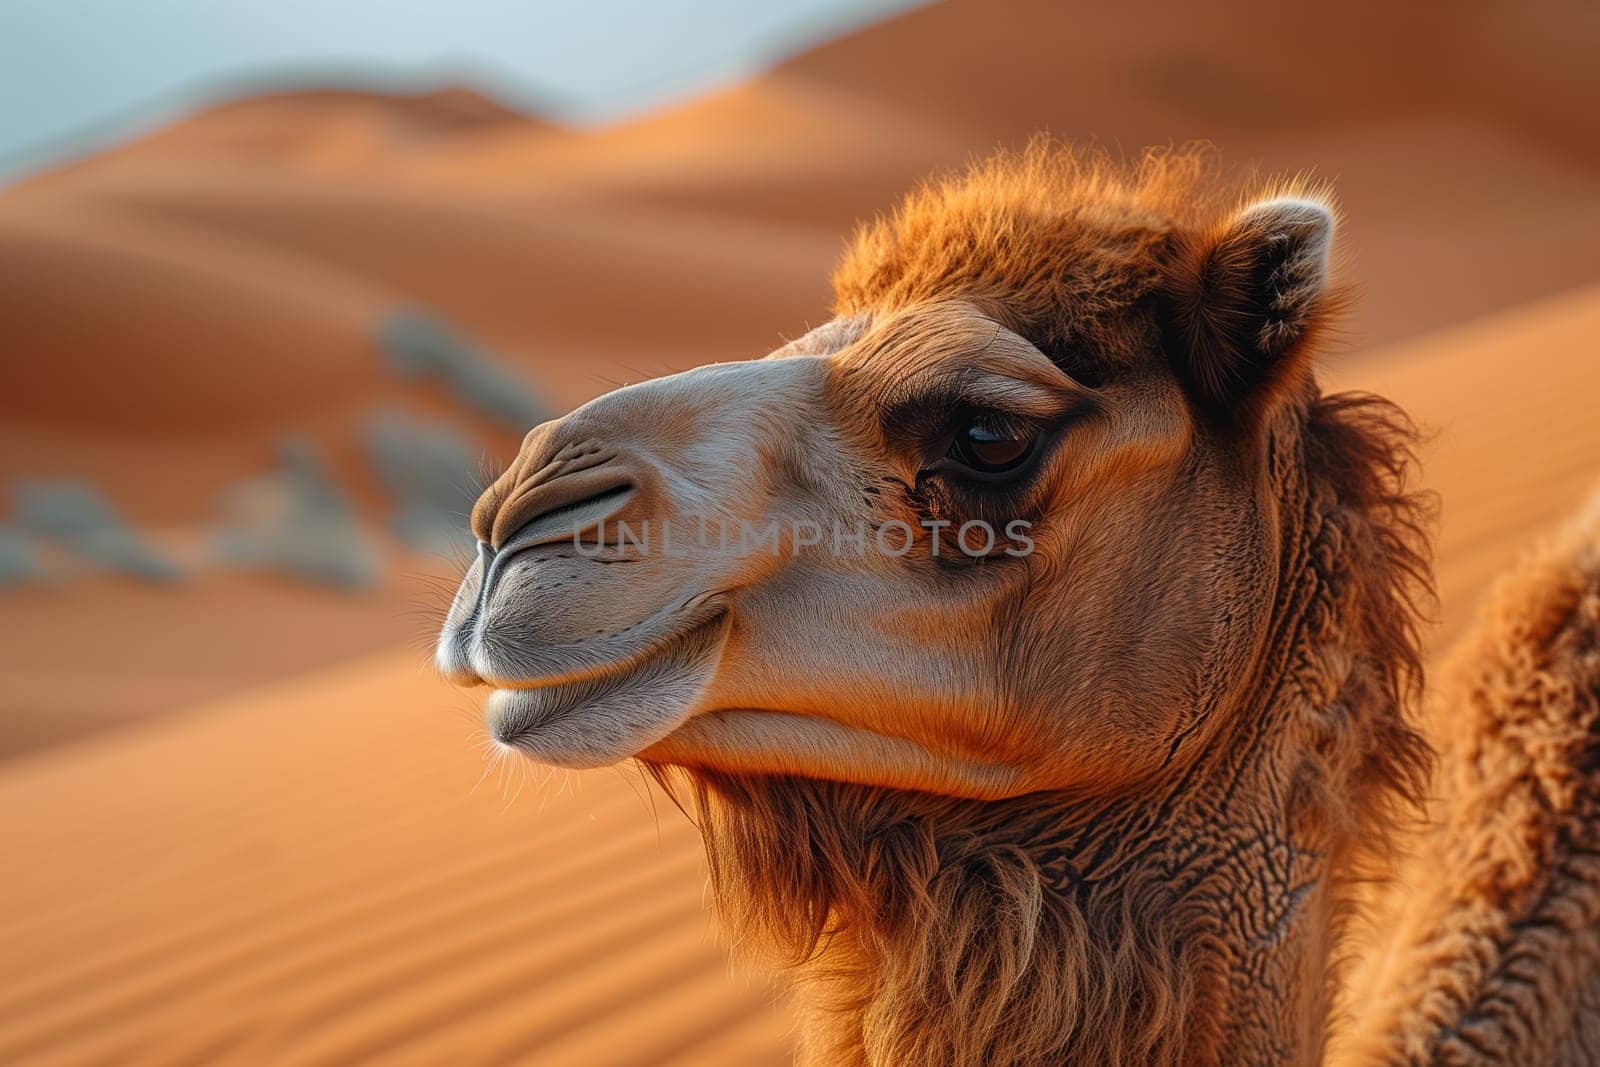 Closeup of a camels eye in the desert landscape with the sky as the background by richwolf